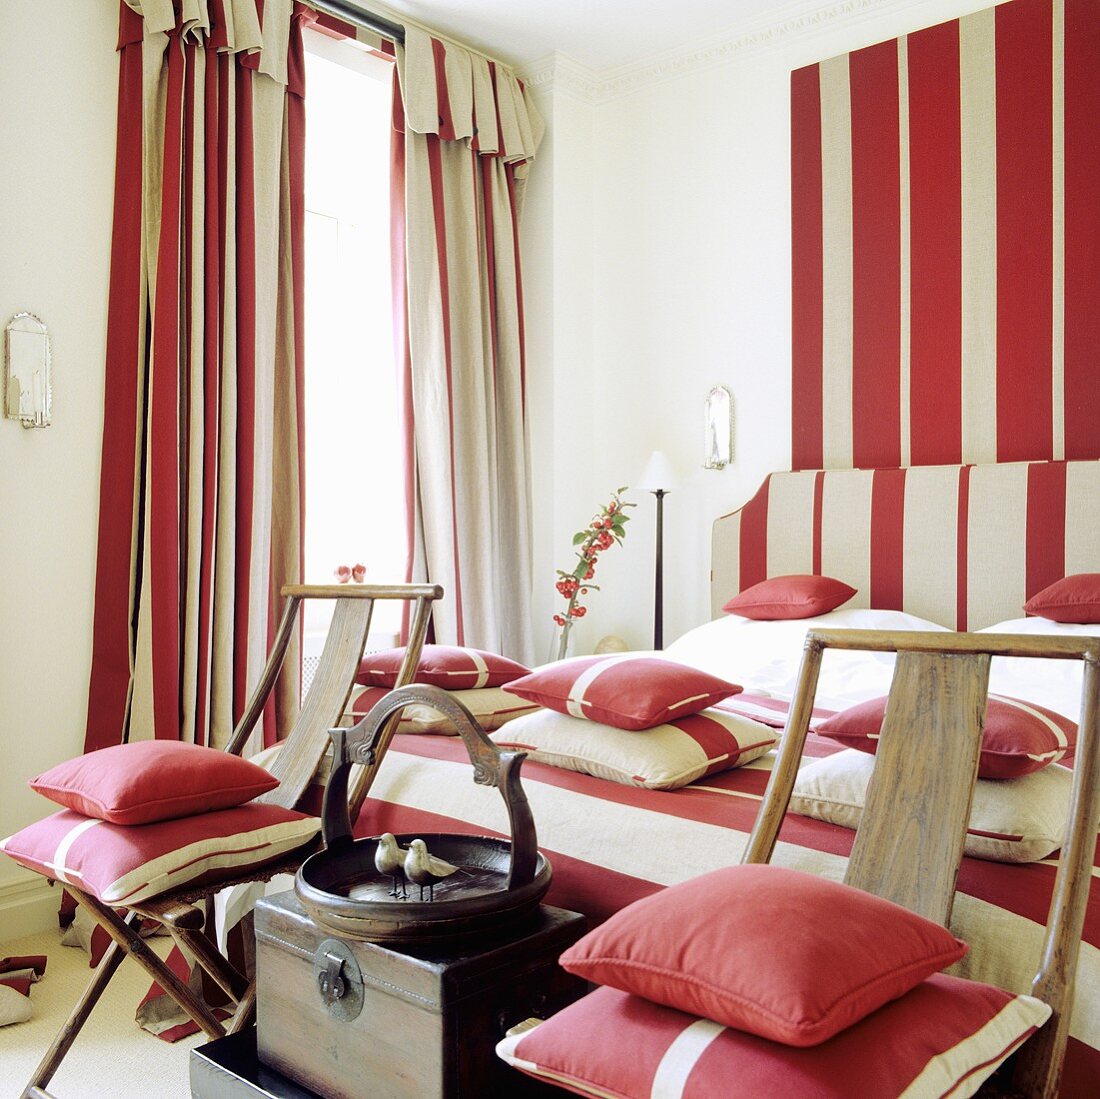 Bedroom with red and white stripes on the pillows, bed linen, curtains and wall